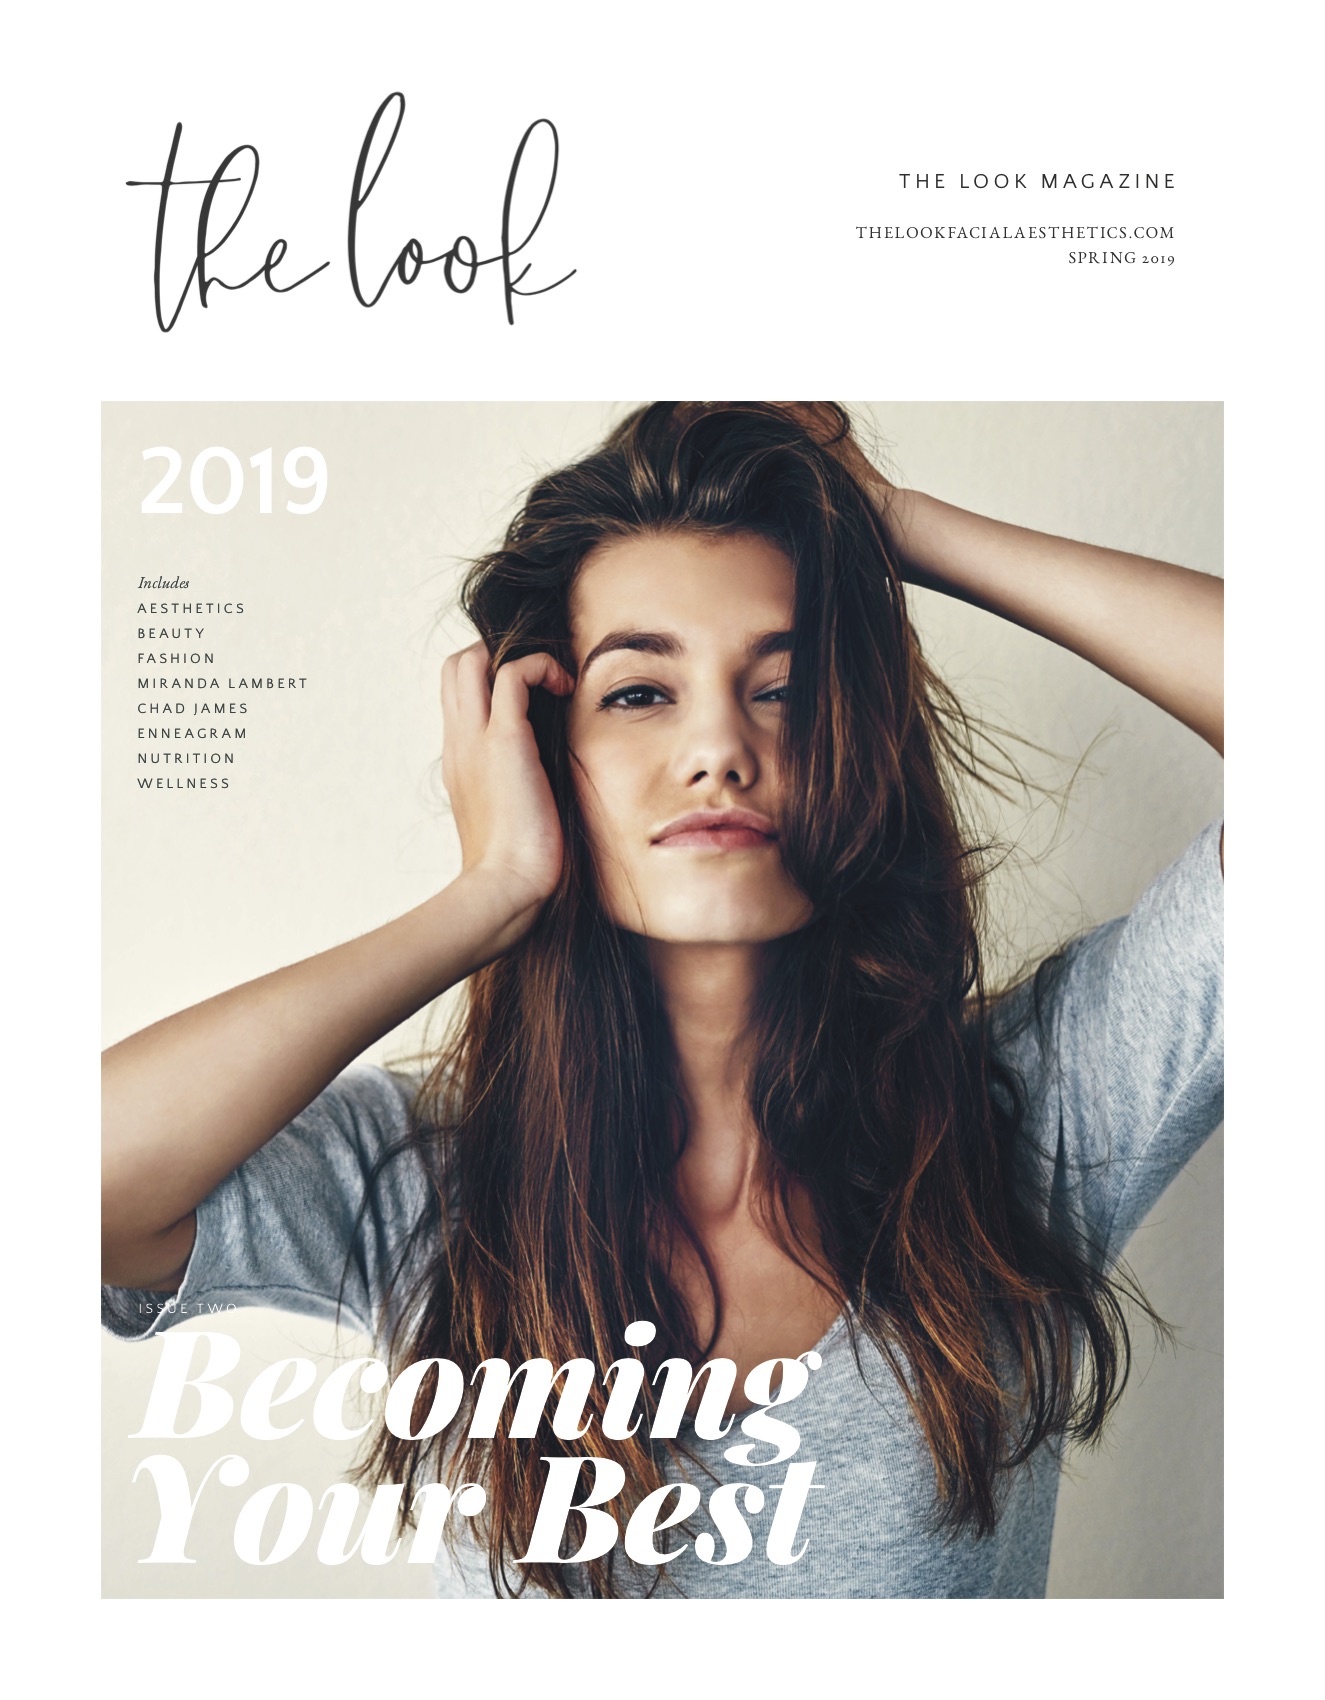 The Look issue two cover